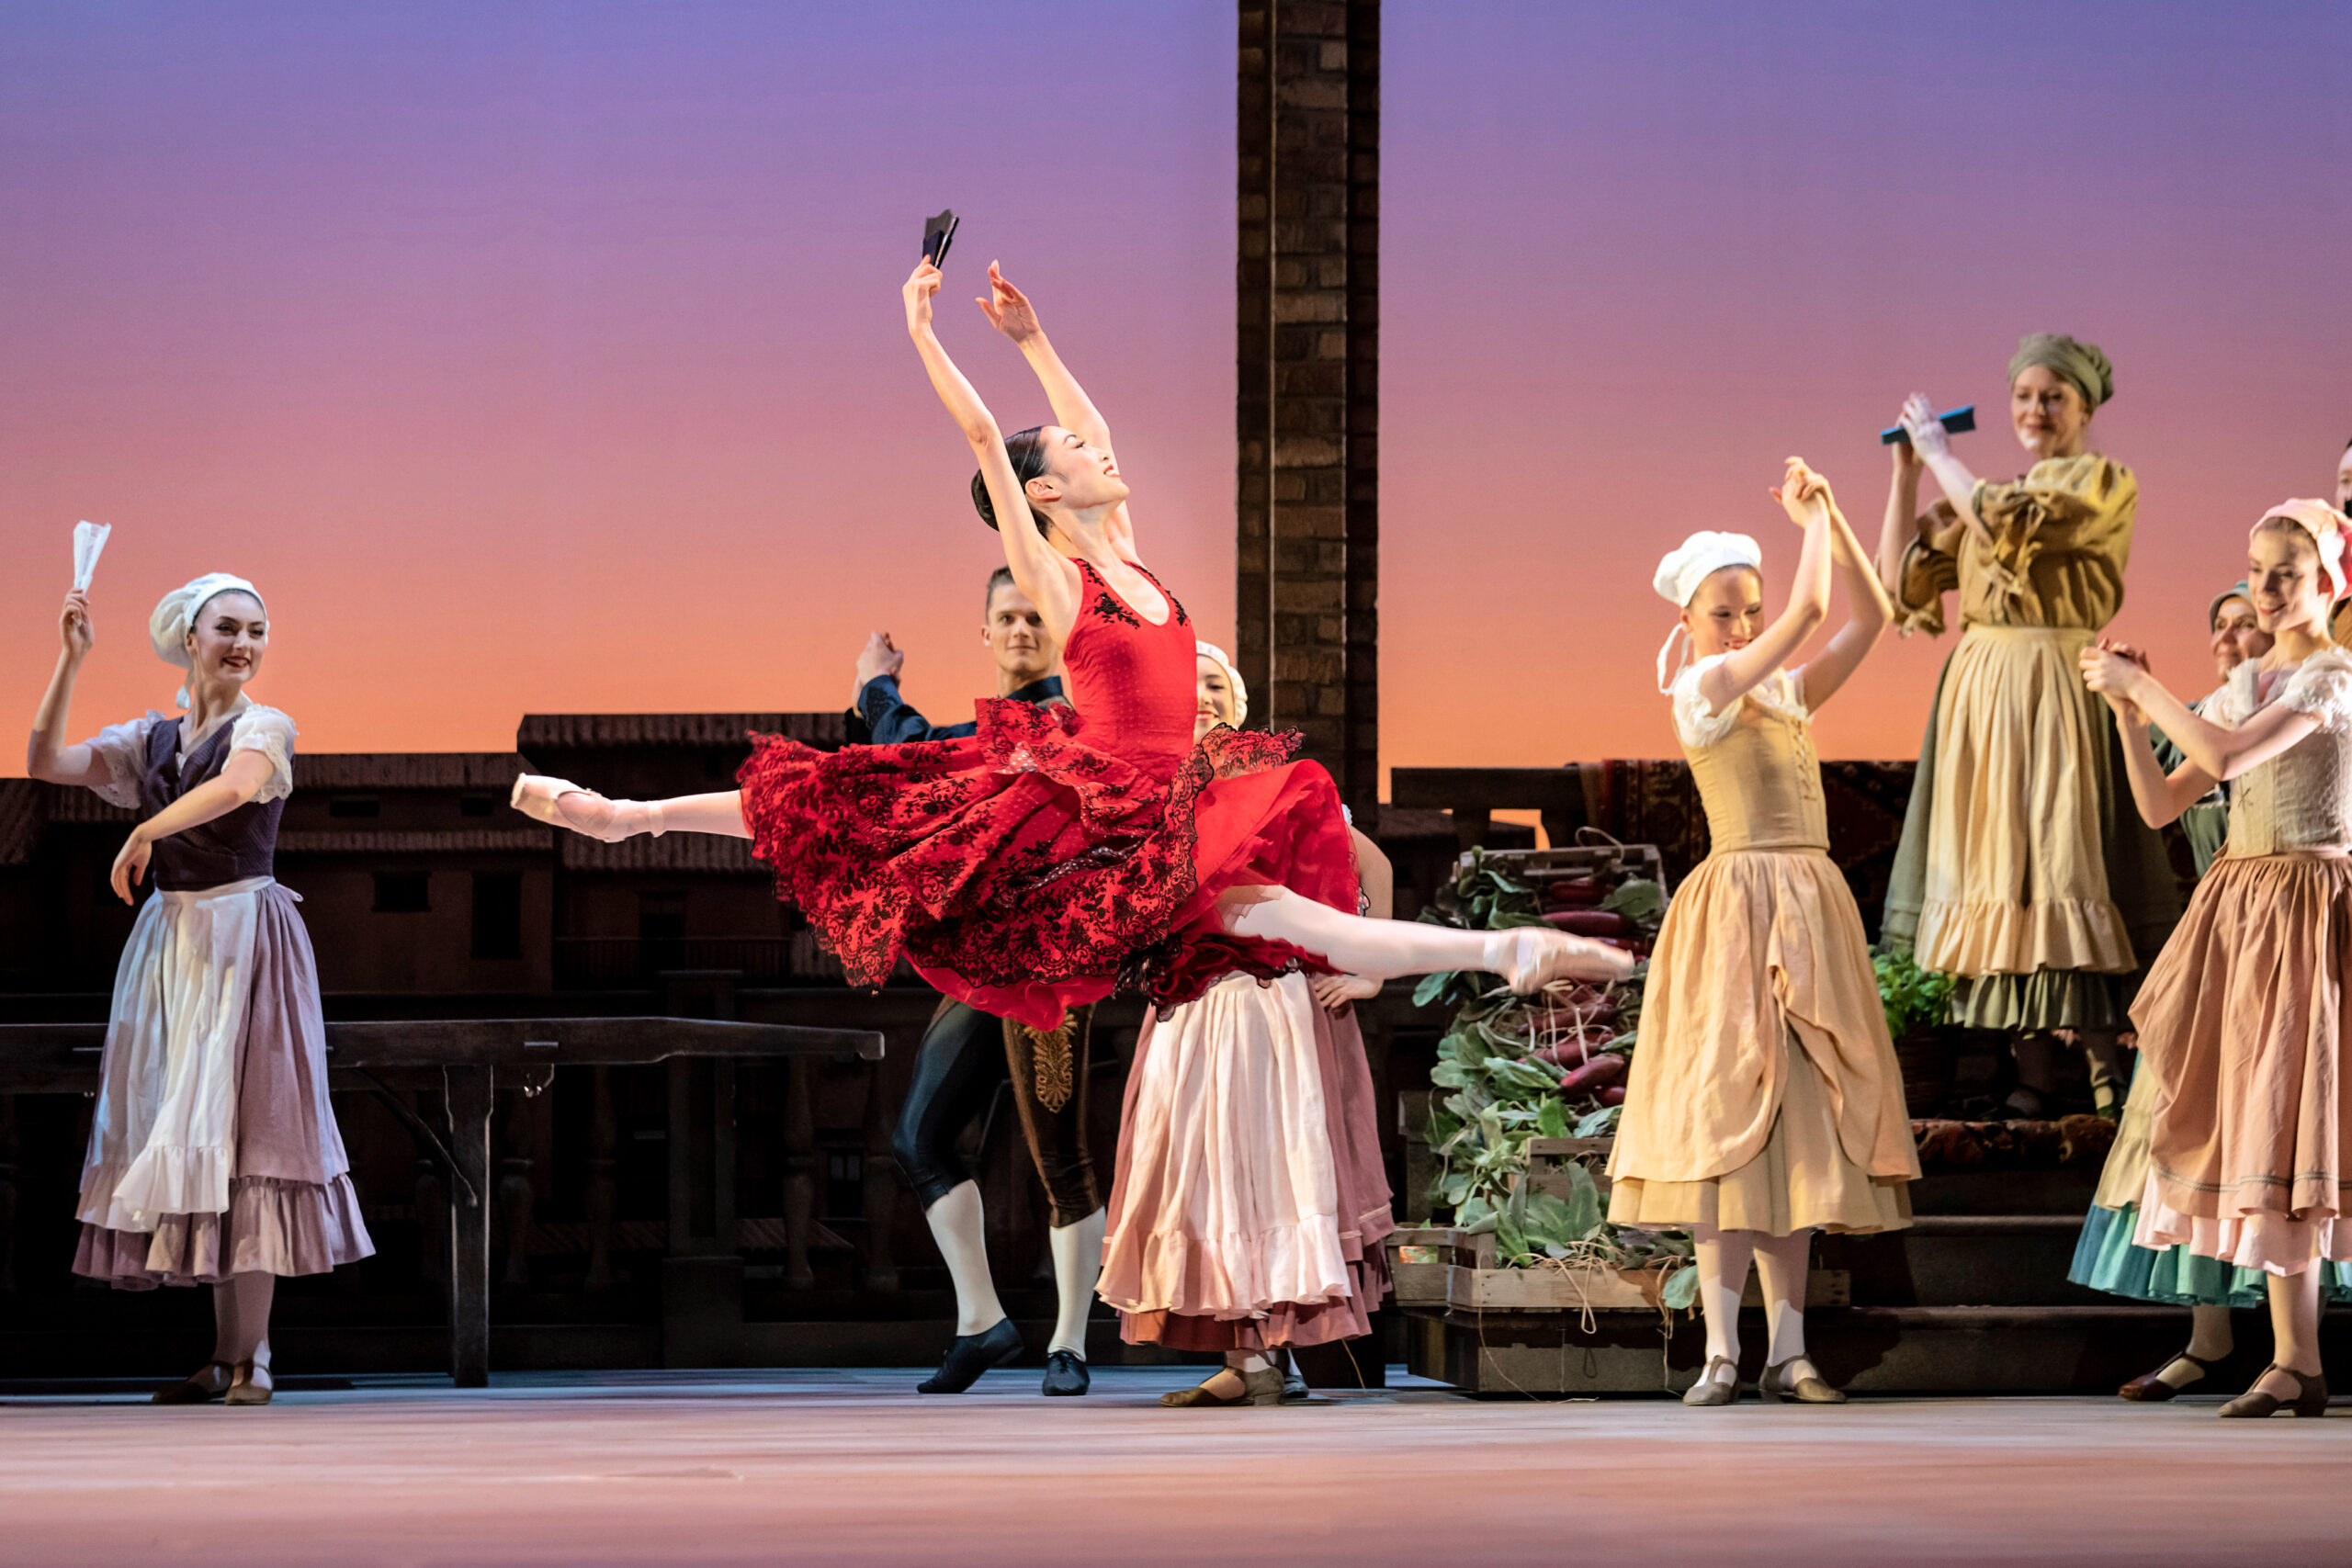 A ballerina in a red knee-length, Spanish style tutu, pink tights and pointe shoes does a saut de chat with her arms in high fifth. She holds a black fan in her right hand and looks up triumphantly as she jumps. Behind her onstage, six dancers wearing peasant costumes clap their hands up hig as they watch her.